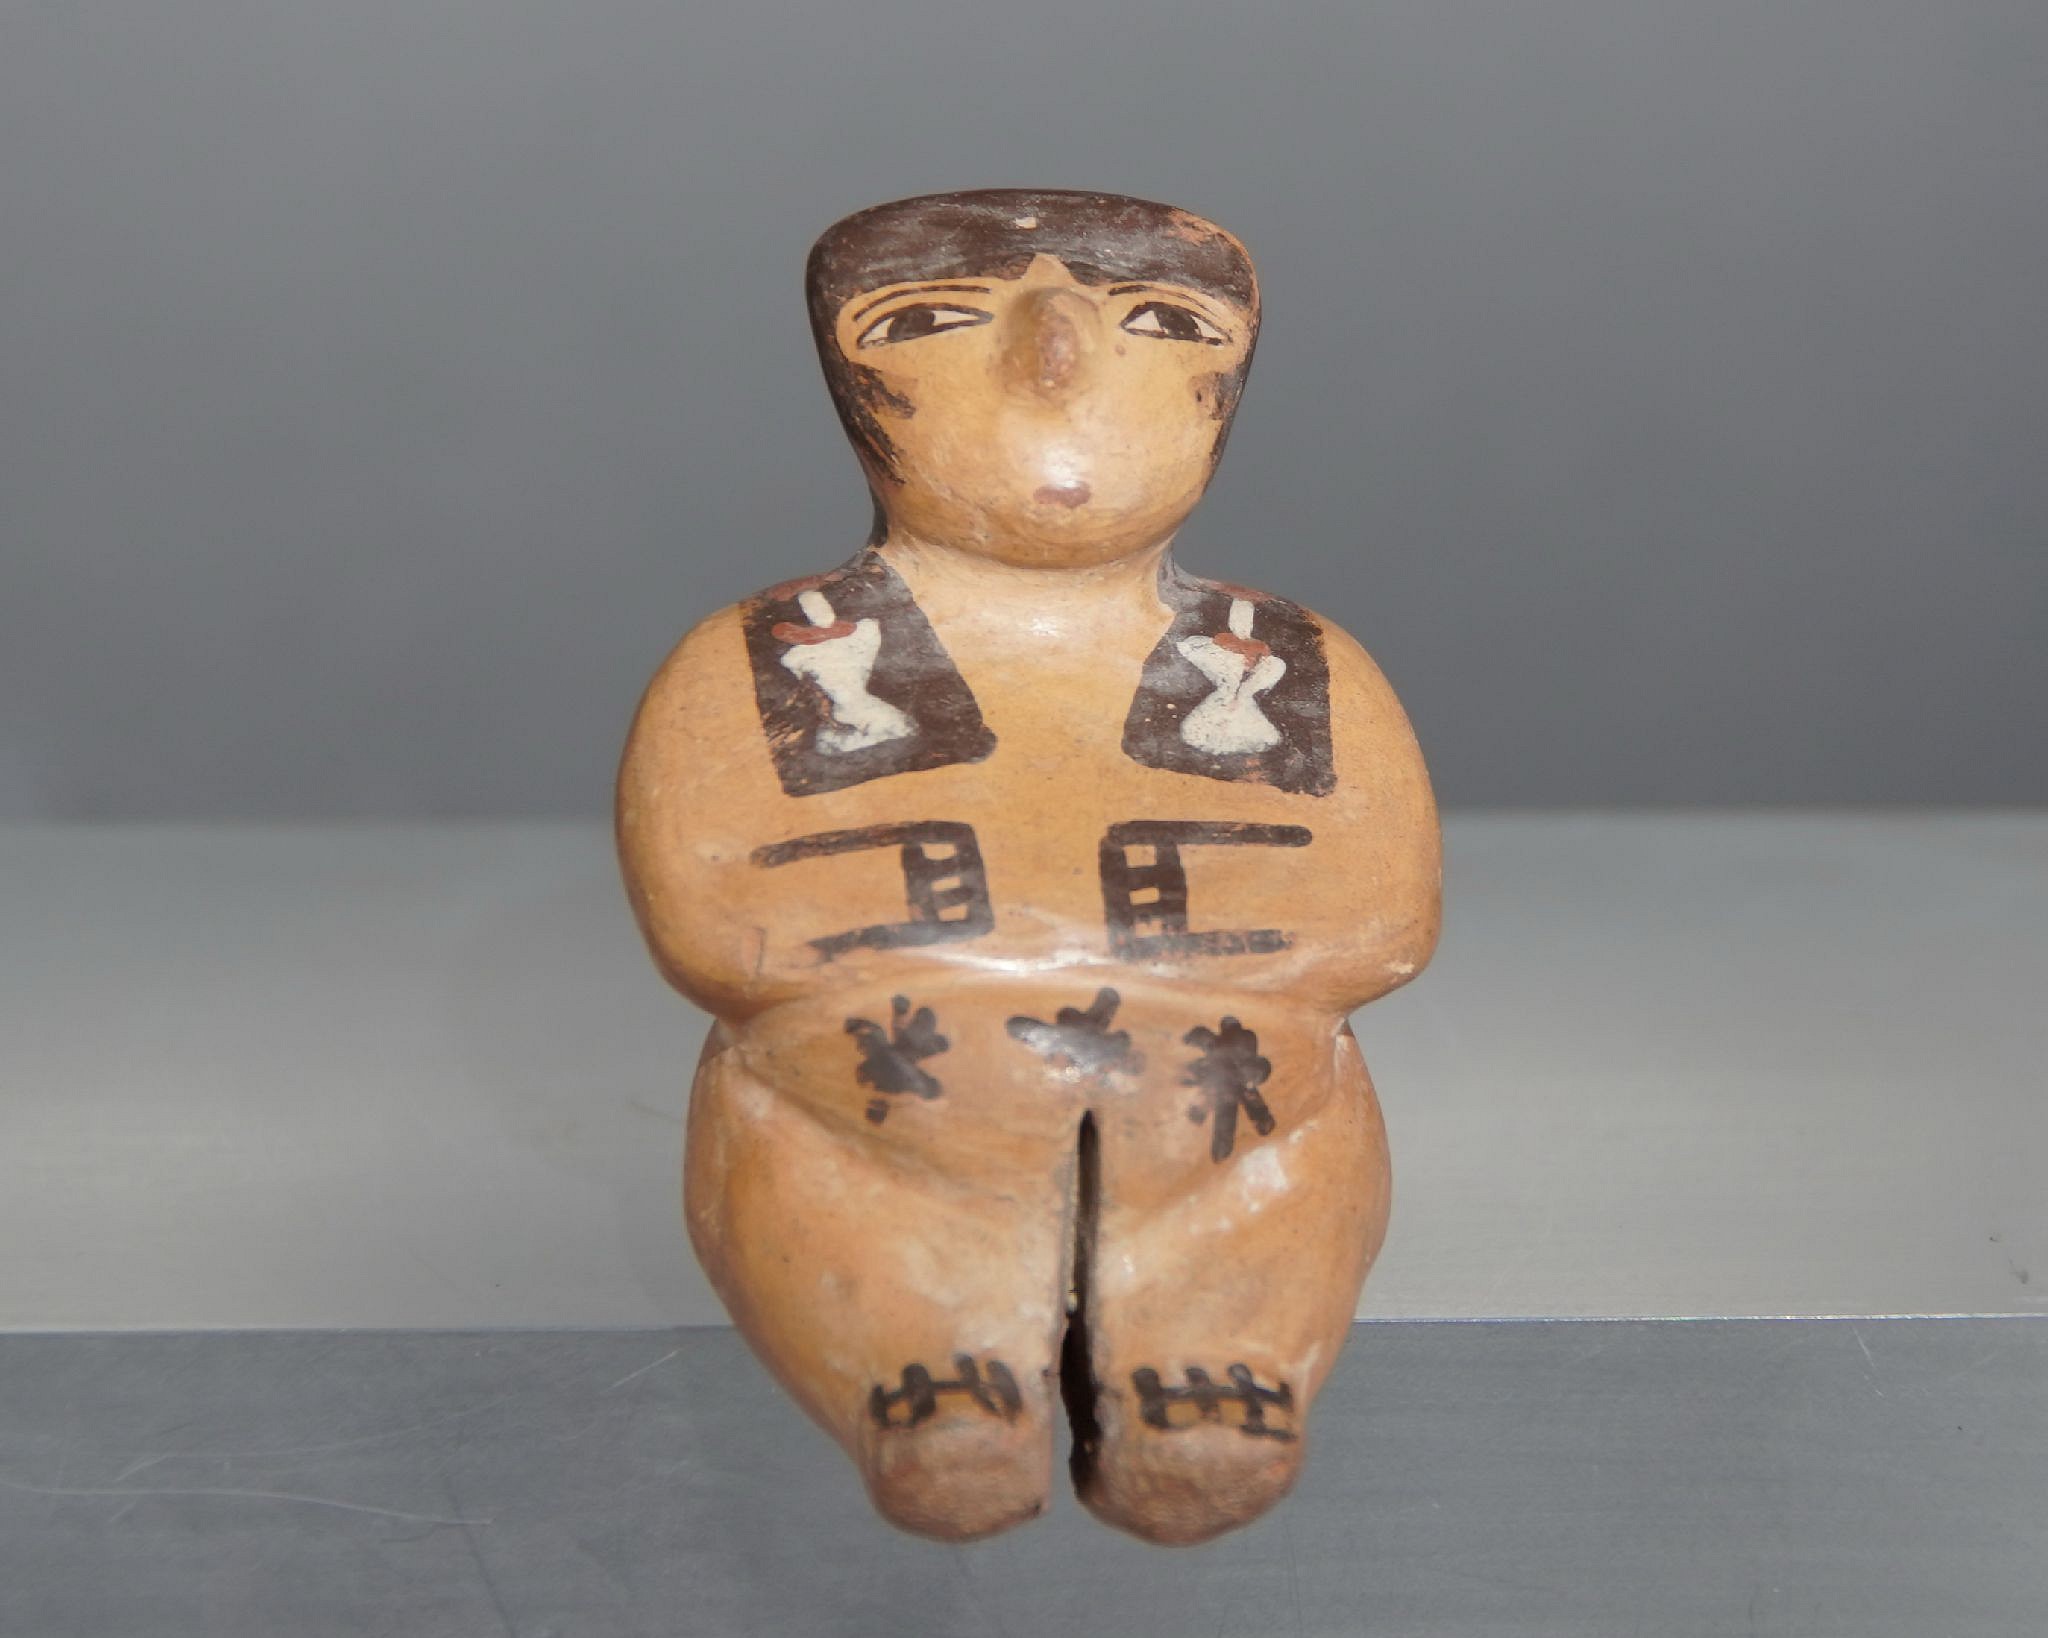 Peru, Nasca Miniature Female Seated Figurine
This seated ceramic female has hands painted on her belly, black hair painted falling over the shoulders, white hair ornaments, and tattoos painted on each buttock.  The intricate tattoos depict the San Pedro cactus, which is known to have psychoactive properties.  The archaeological record indicates that San Pedro cactus was likely used by the ancient Andeans as a libation during shamanic ceremonies.  This figurine would originally have been dressed in a miniature woven garment, which was eroded or lost over time.  A similar figure is illustrated in A Sourcebook of Nasca Ceramic Iconography, p. 146.  Ex. collection Jean Lions, France.
Media: Ceramic
Dimensions: Length: 7.1cm
$2,500
M4049